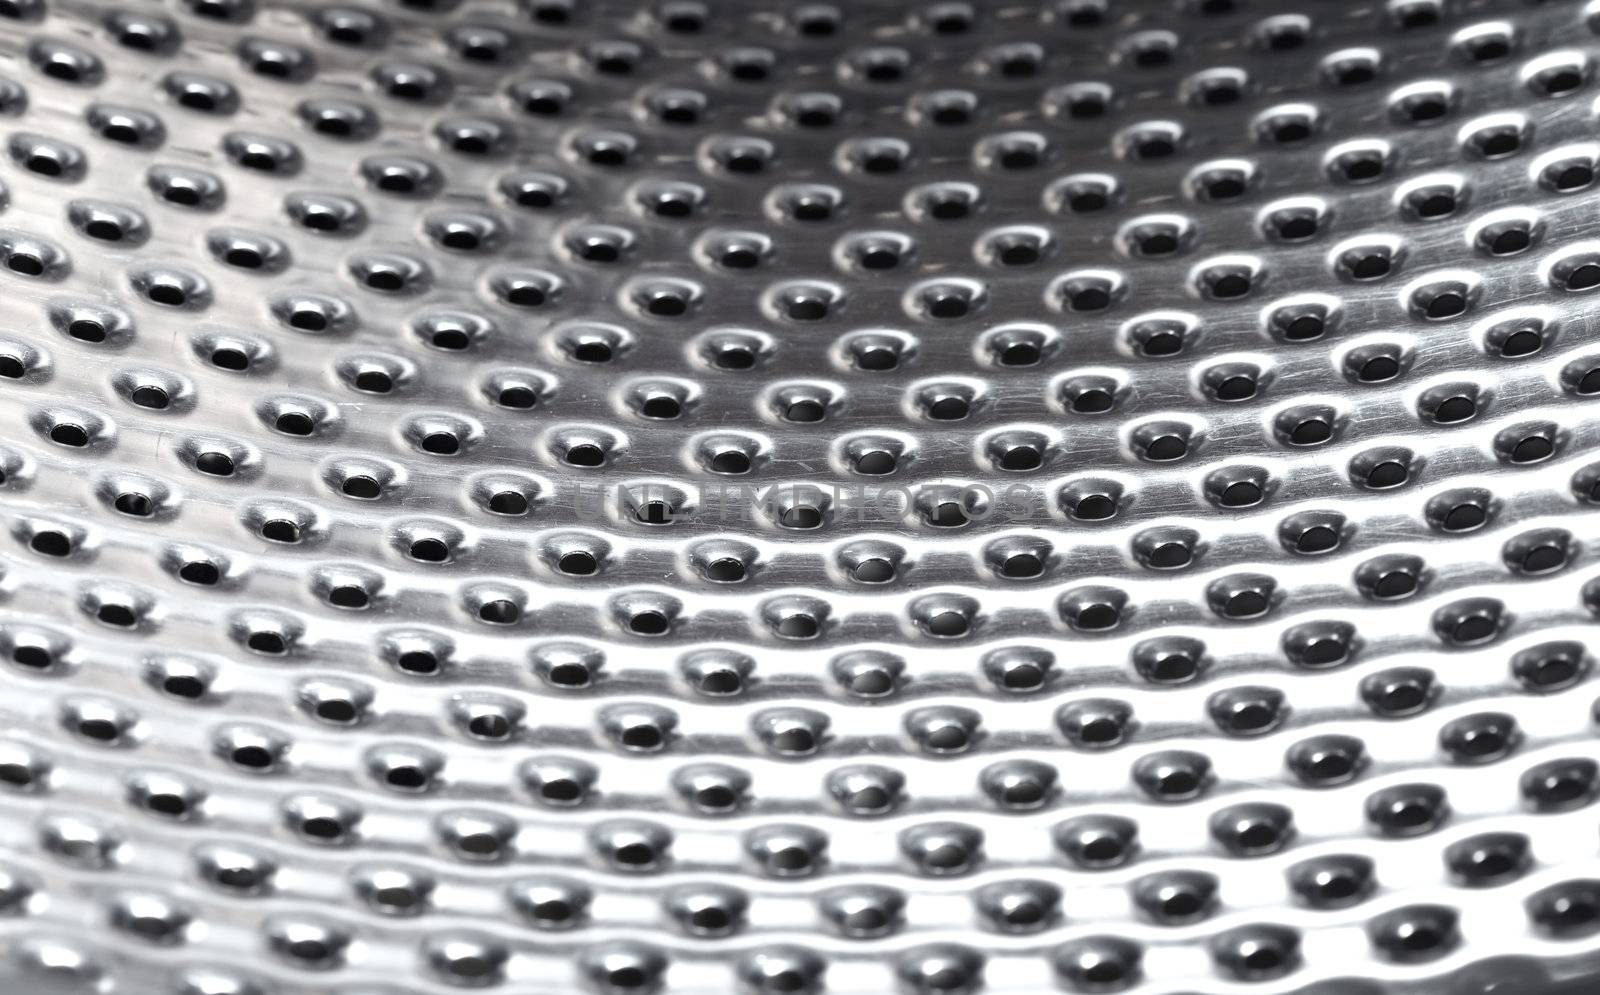 Close-up photo of the metal pattern with perforated holes